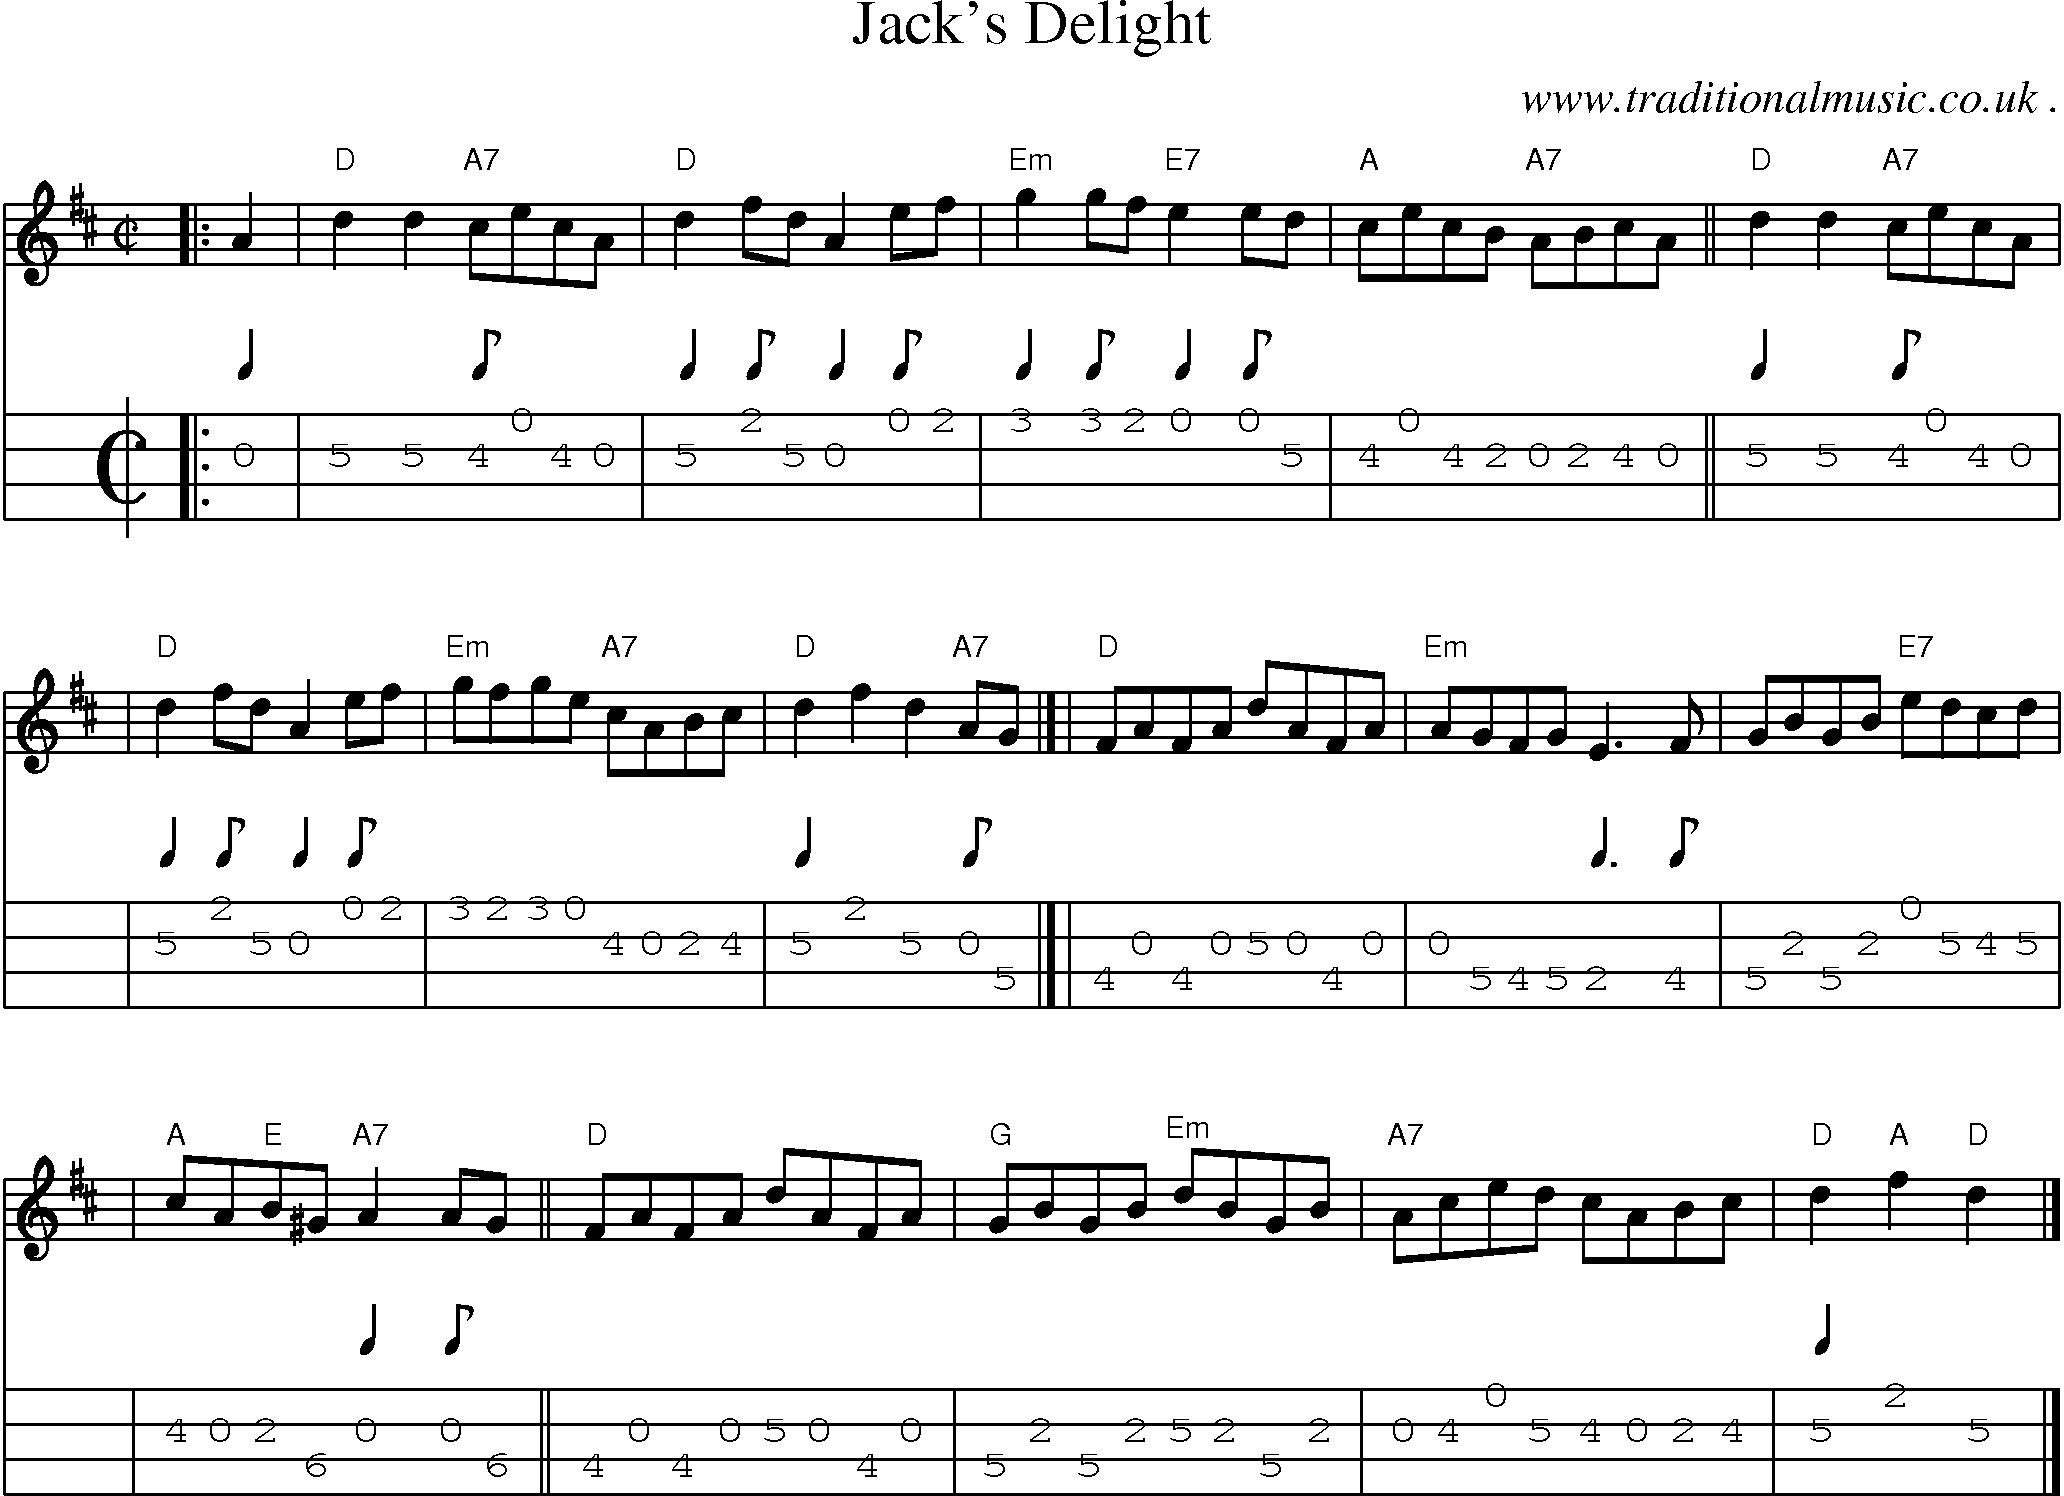 Sheet-music  score, Chords and Mandolin Tabs for Jacks Delight